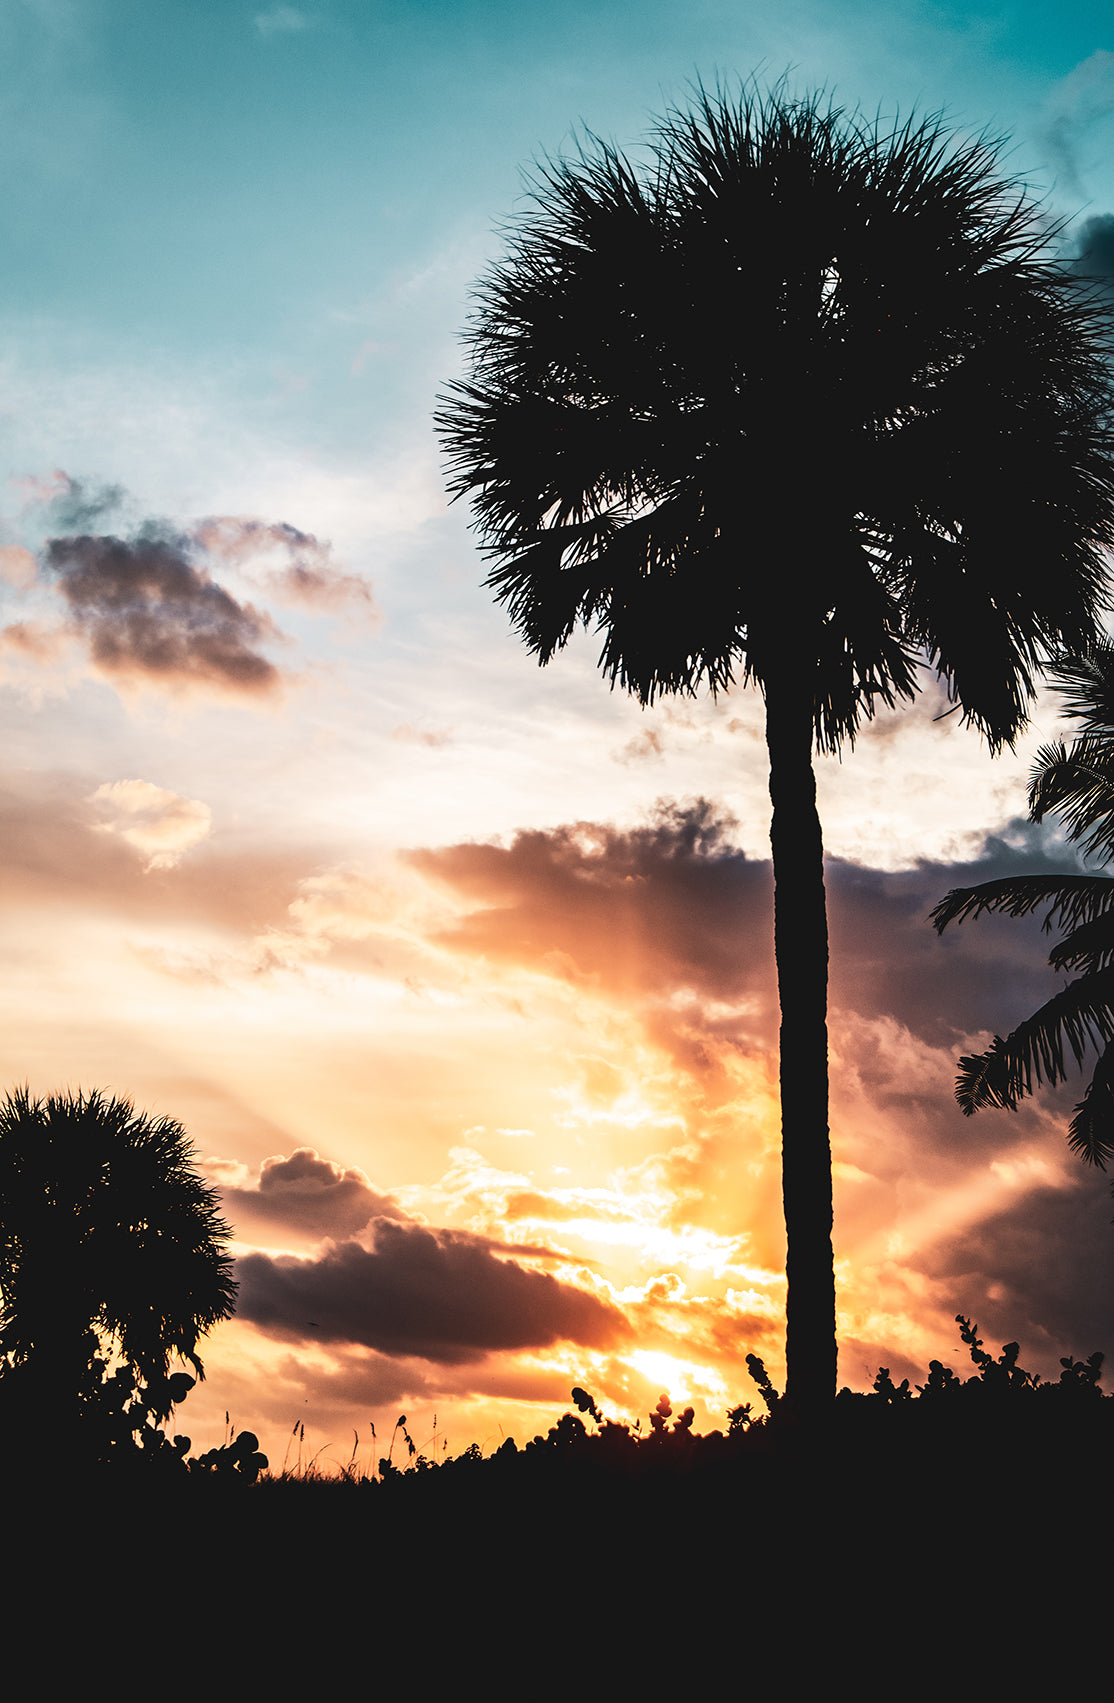 Palm Tree Silhouettes and Sunset Coastal Landscape Fine Art Canvas Wall Art Prints  - PIPAFINEART